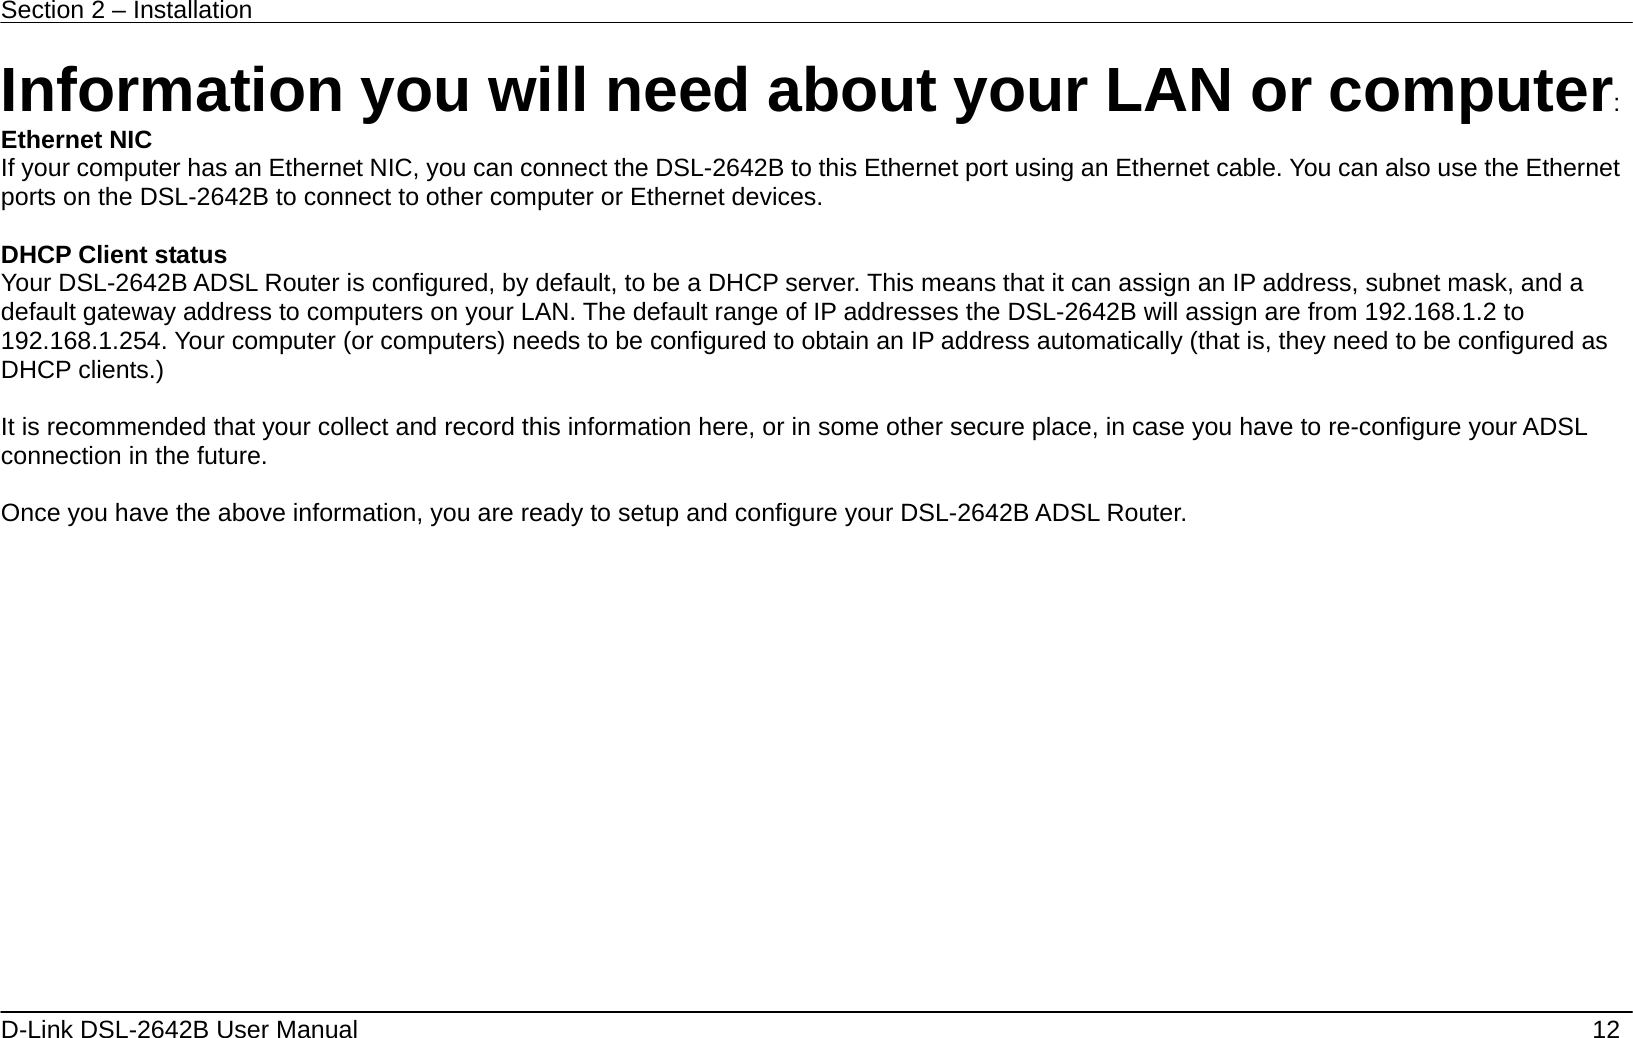 Section 2 – Installation   D-Link DSL-2642B User Manual    12 Information you will need about your LAN or computer: Ethernet NIC If your computer has an Ethernet NIC, you can connect the DSL-2642B to this Ethernet port using an Ethernet cable. You can also use the Ethernet ports on the DSL-2642B to connect to other computer or Ethernet devices.  DHCP Client status Your DSL-2642B ADSL Router is configured, by default, to be a DHCP server. This means that it can assign an IP address, subnet mask, and a default gateway address to computers on your LAN. The default range of IP addresses the DSL-2642B will assign are from 192.168.1.2 to 192.168.1.254. Your computer (or computers) needs to be configured to obtain an IP address automatically (that is, they need to be configured as DHCP clients.)    It is recommended that your collect and record this information here, or in some other secure place, in case you have to re-configure your ADSL connection in the future.  Once you have the above information, you are ready to setup and configure your DSL-2642B ADSL Router. 